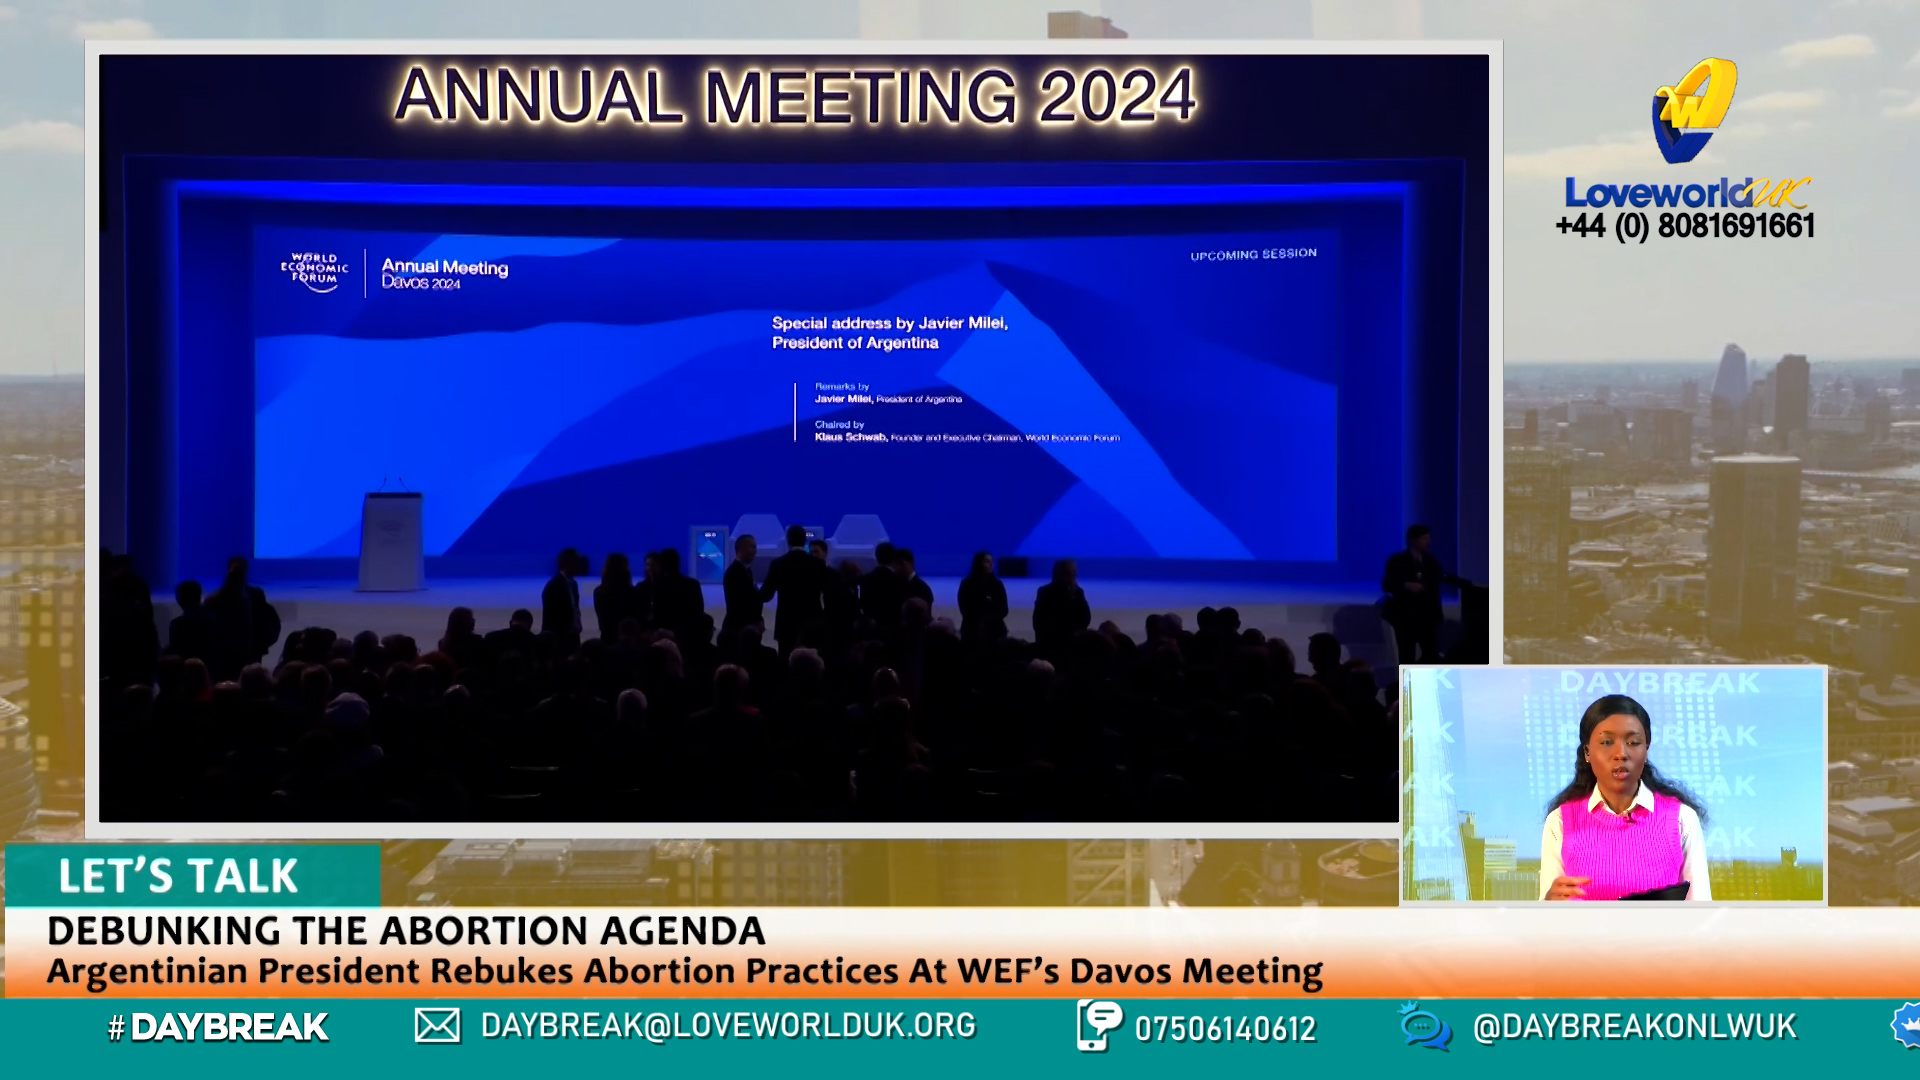 EP 14 - DEBUNKING THE ABORTION AGENDA - Argentinian President Rebukes Abortion Practices At WEF’s Davos Meeting